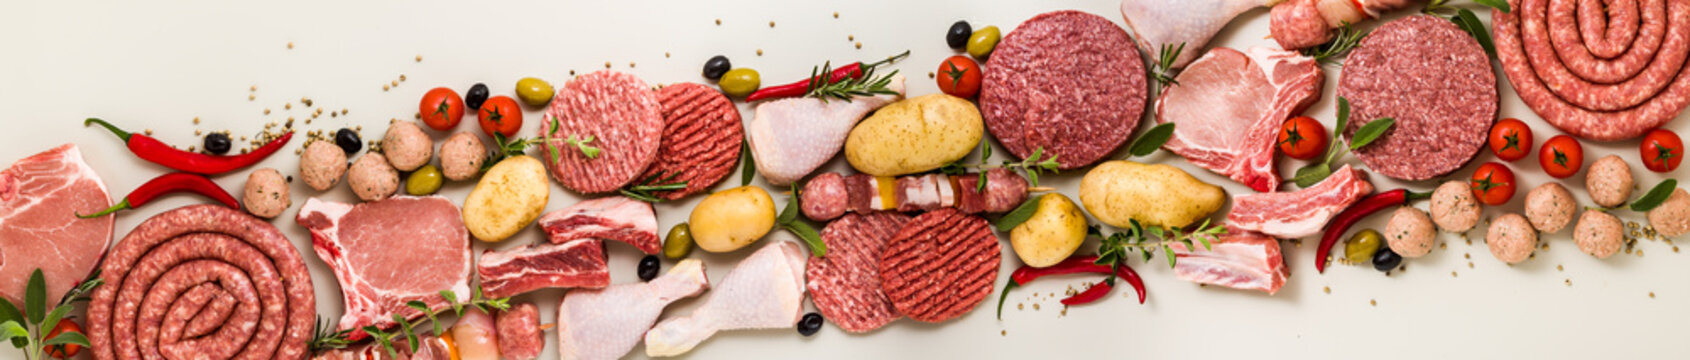 various types of italian raw meat with spices, vegetables and aromatic herbs. banner for supermarket or butcher